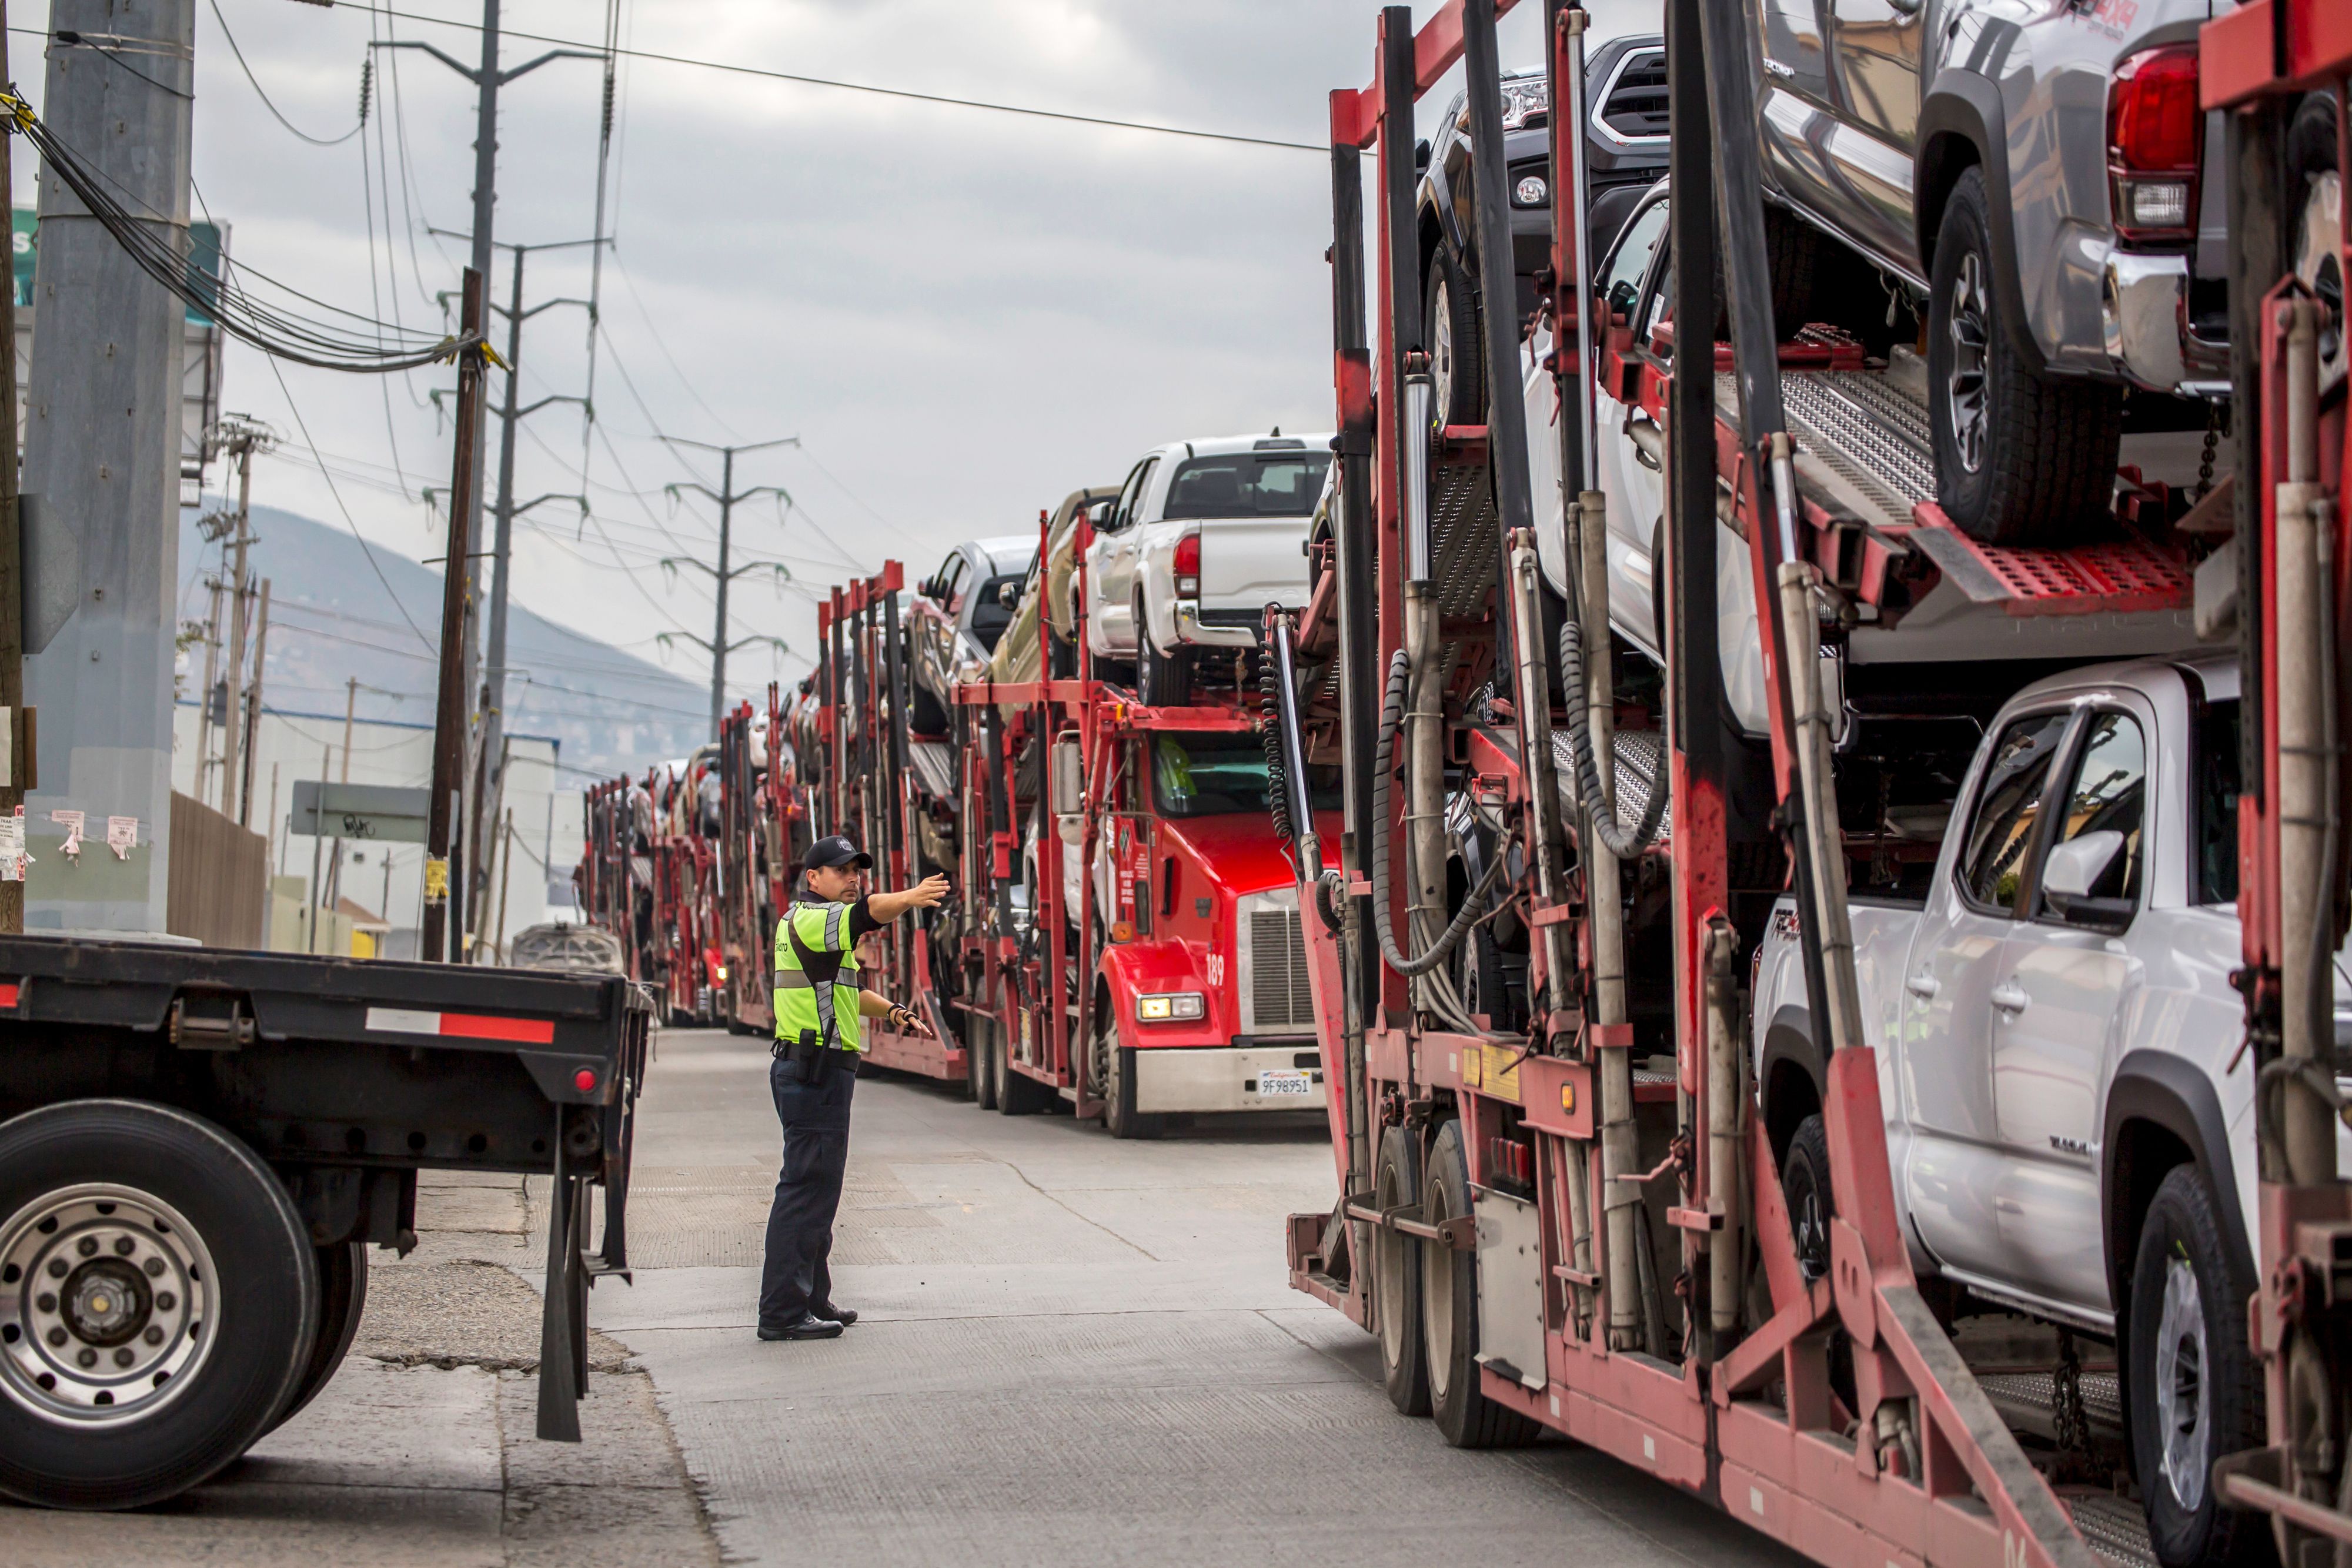 Mexican-made autos stream across border at record rate in first half